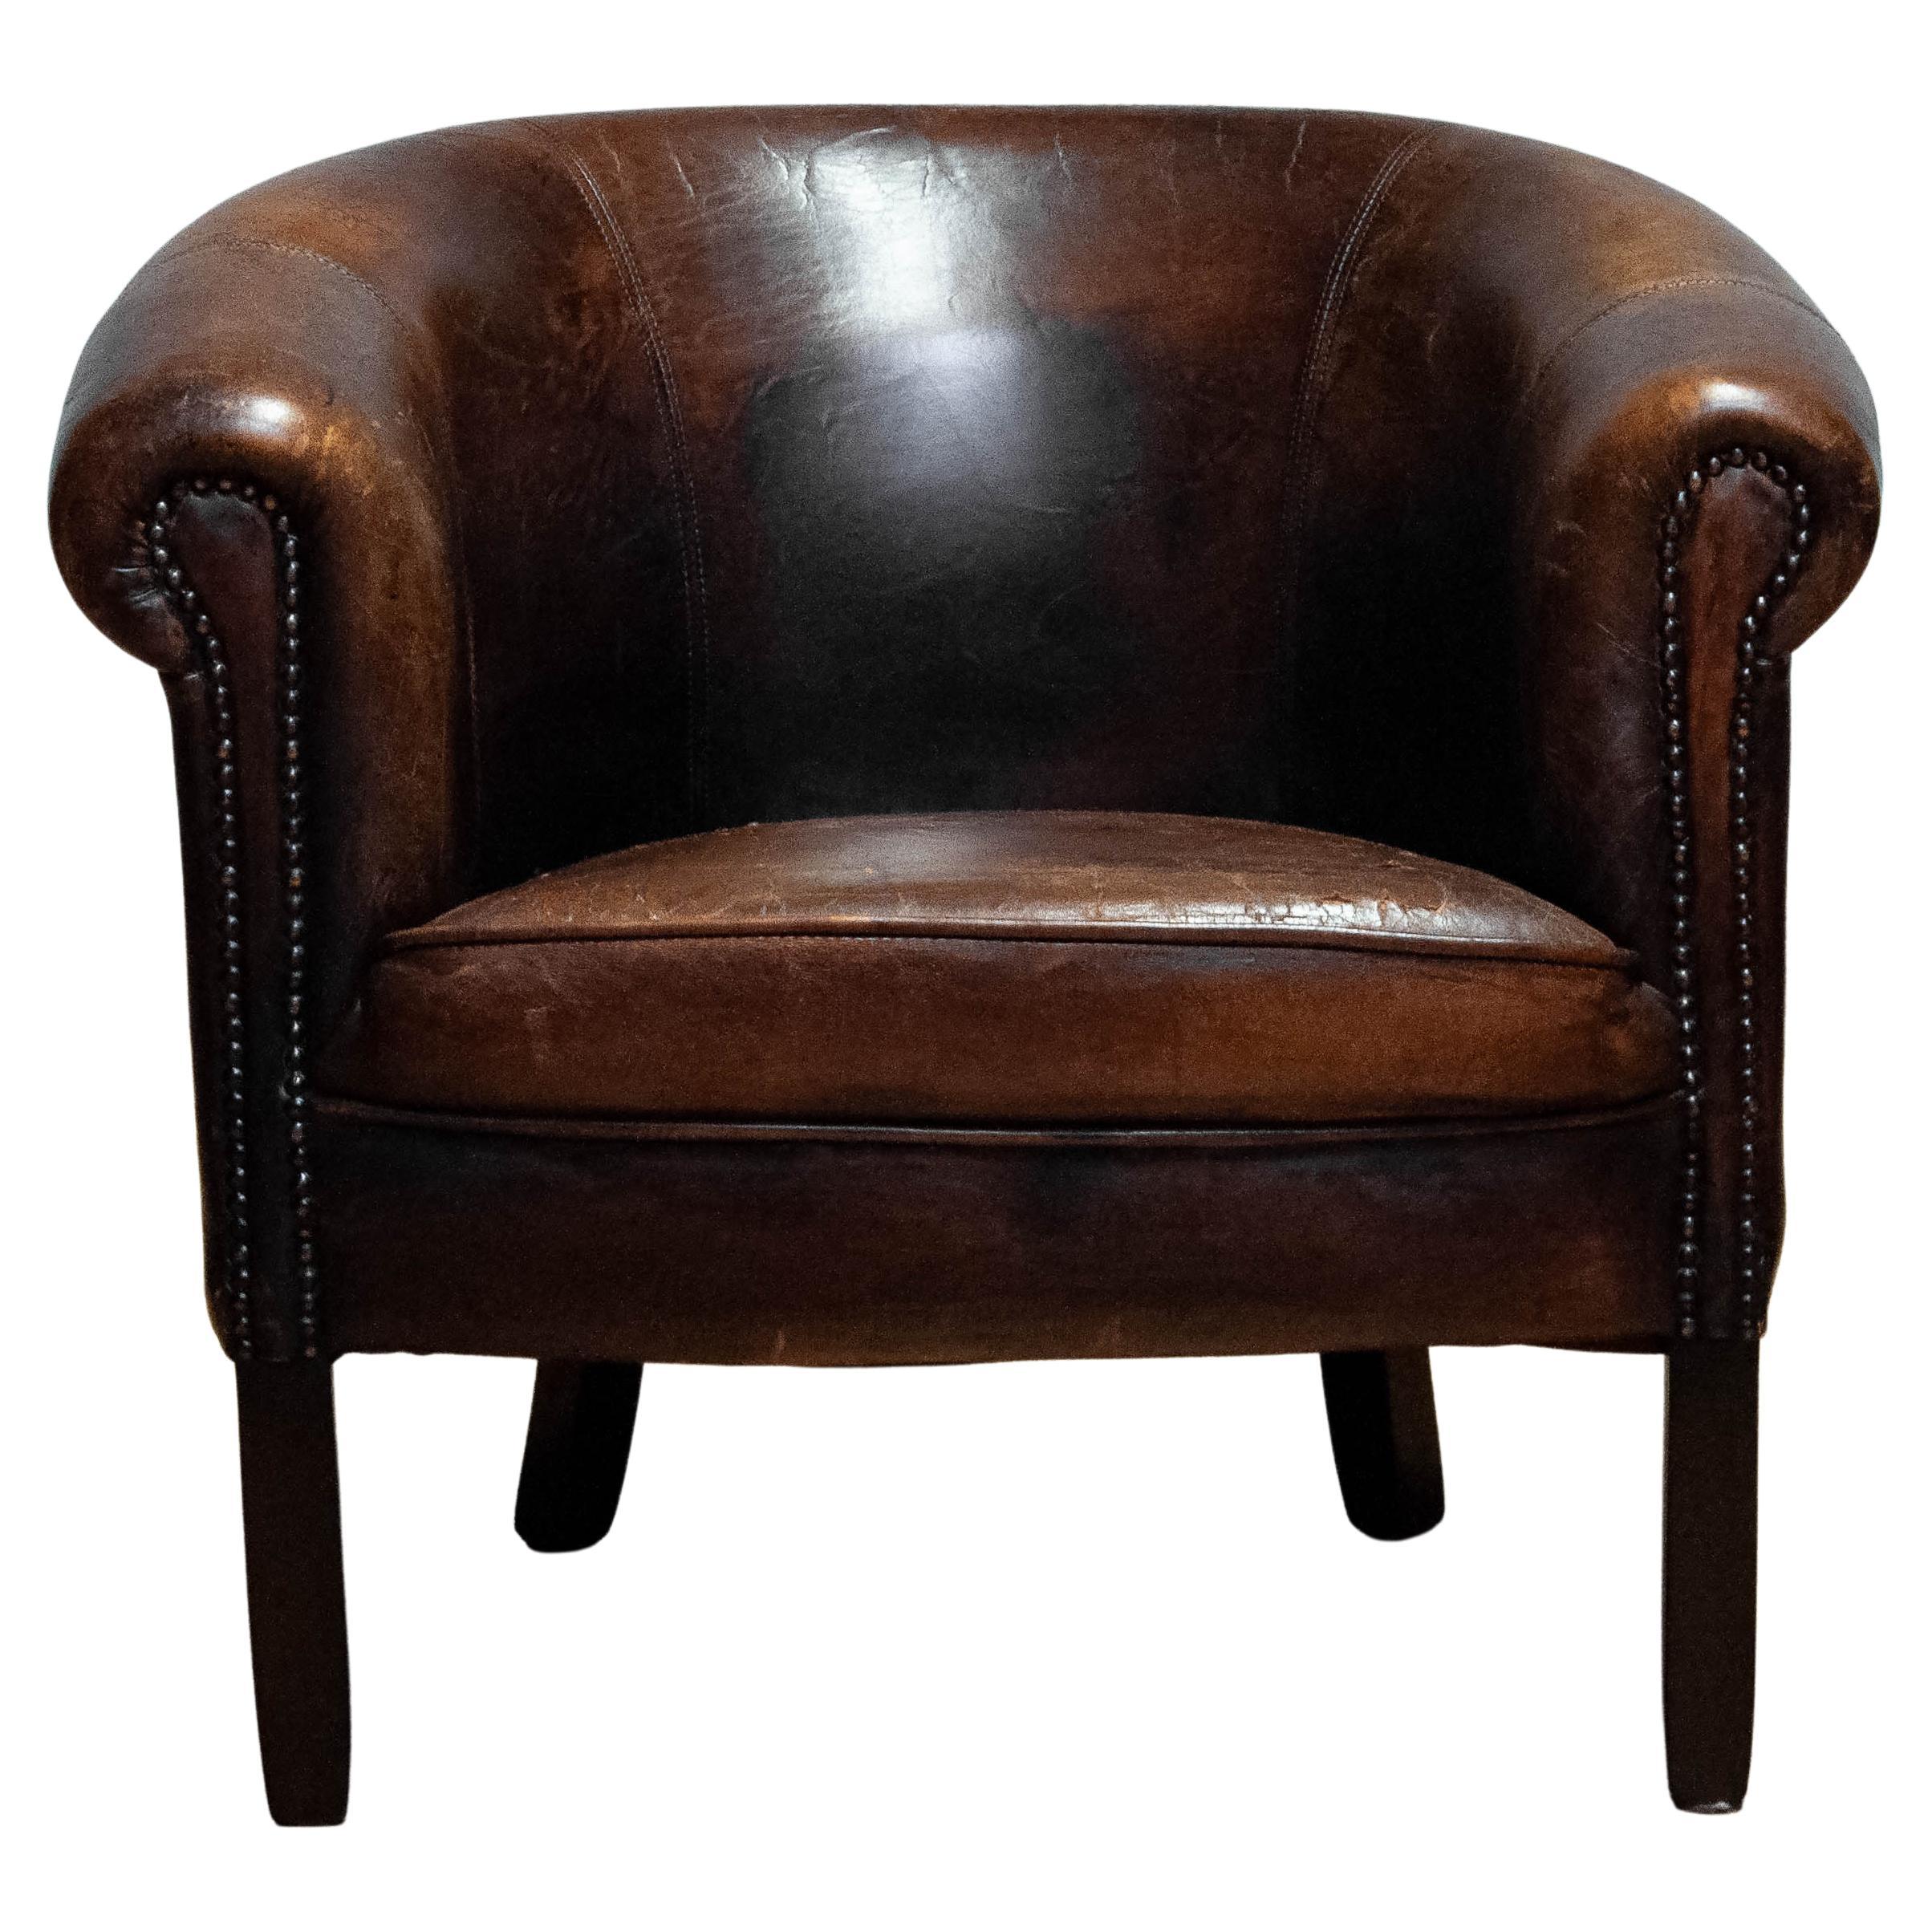 1960 Patinated Dark Brown Dutch Colonial Sheepskin Upholstered Lounge Club Chair For Sale